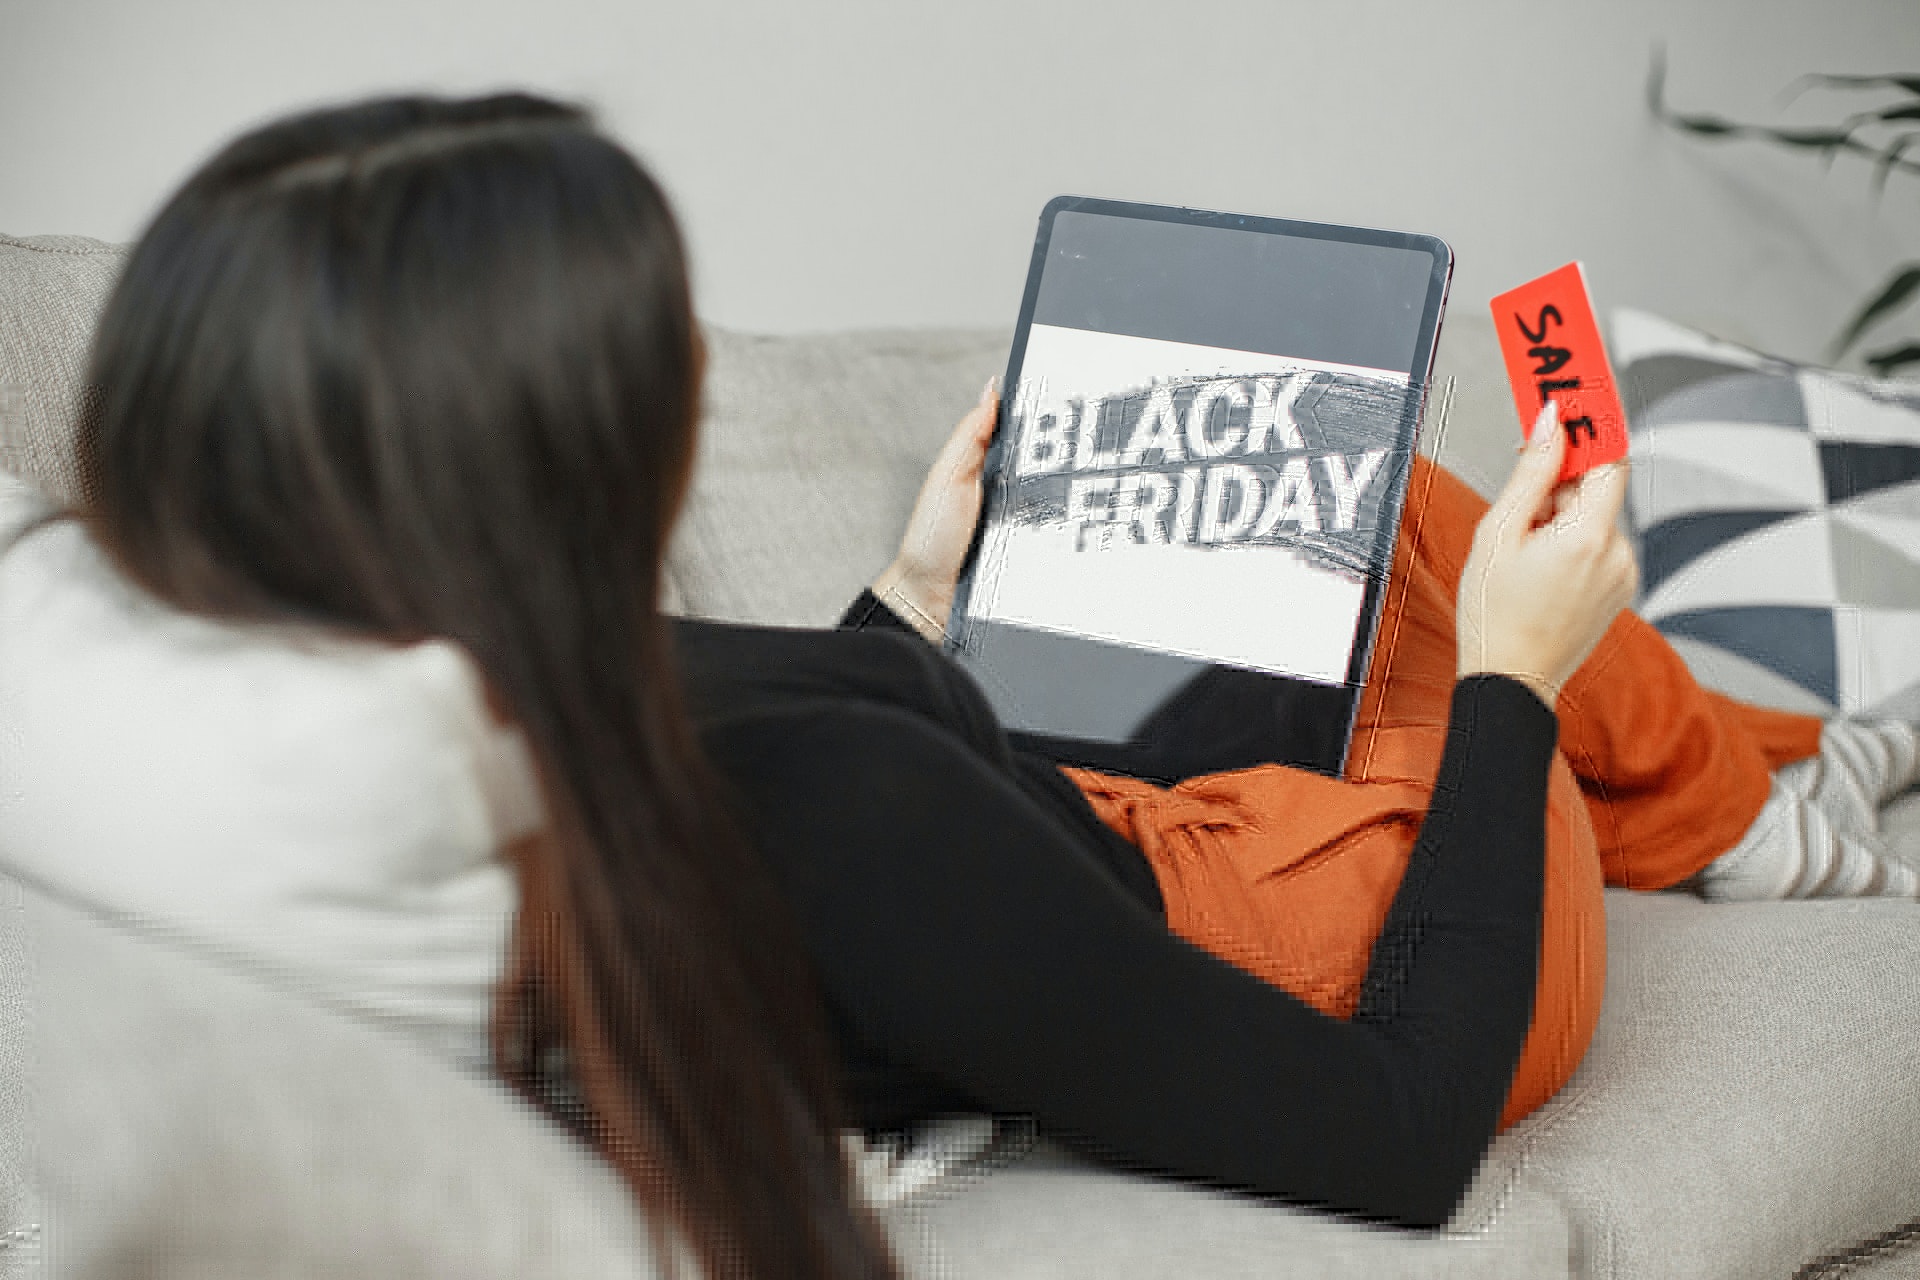 Are you cyber-ready for the shopping season? Your digital security should be at the top of your Black Friday shopping list